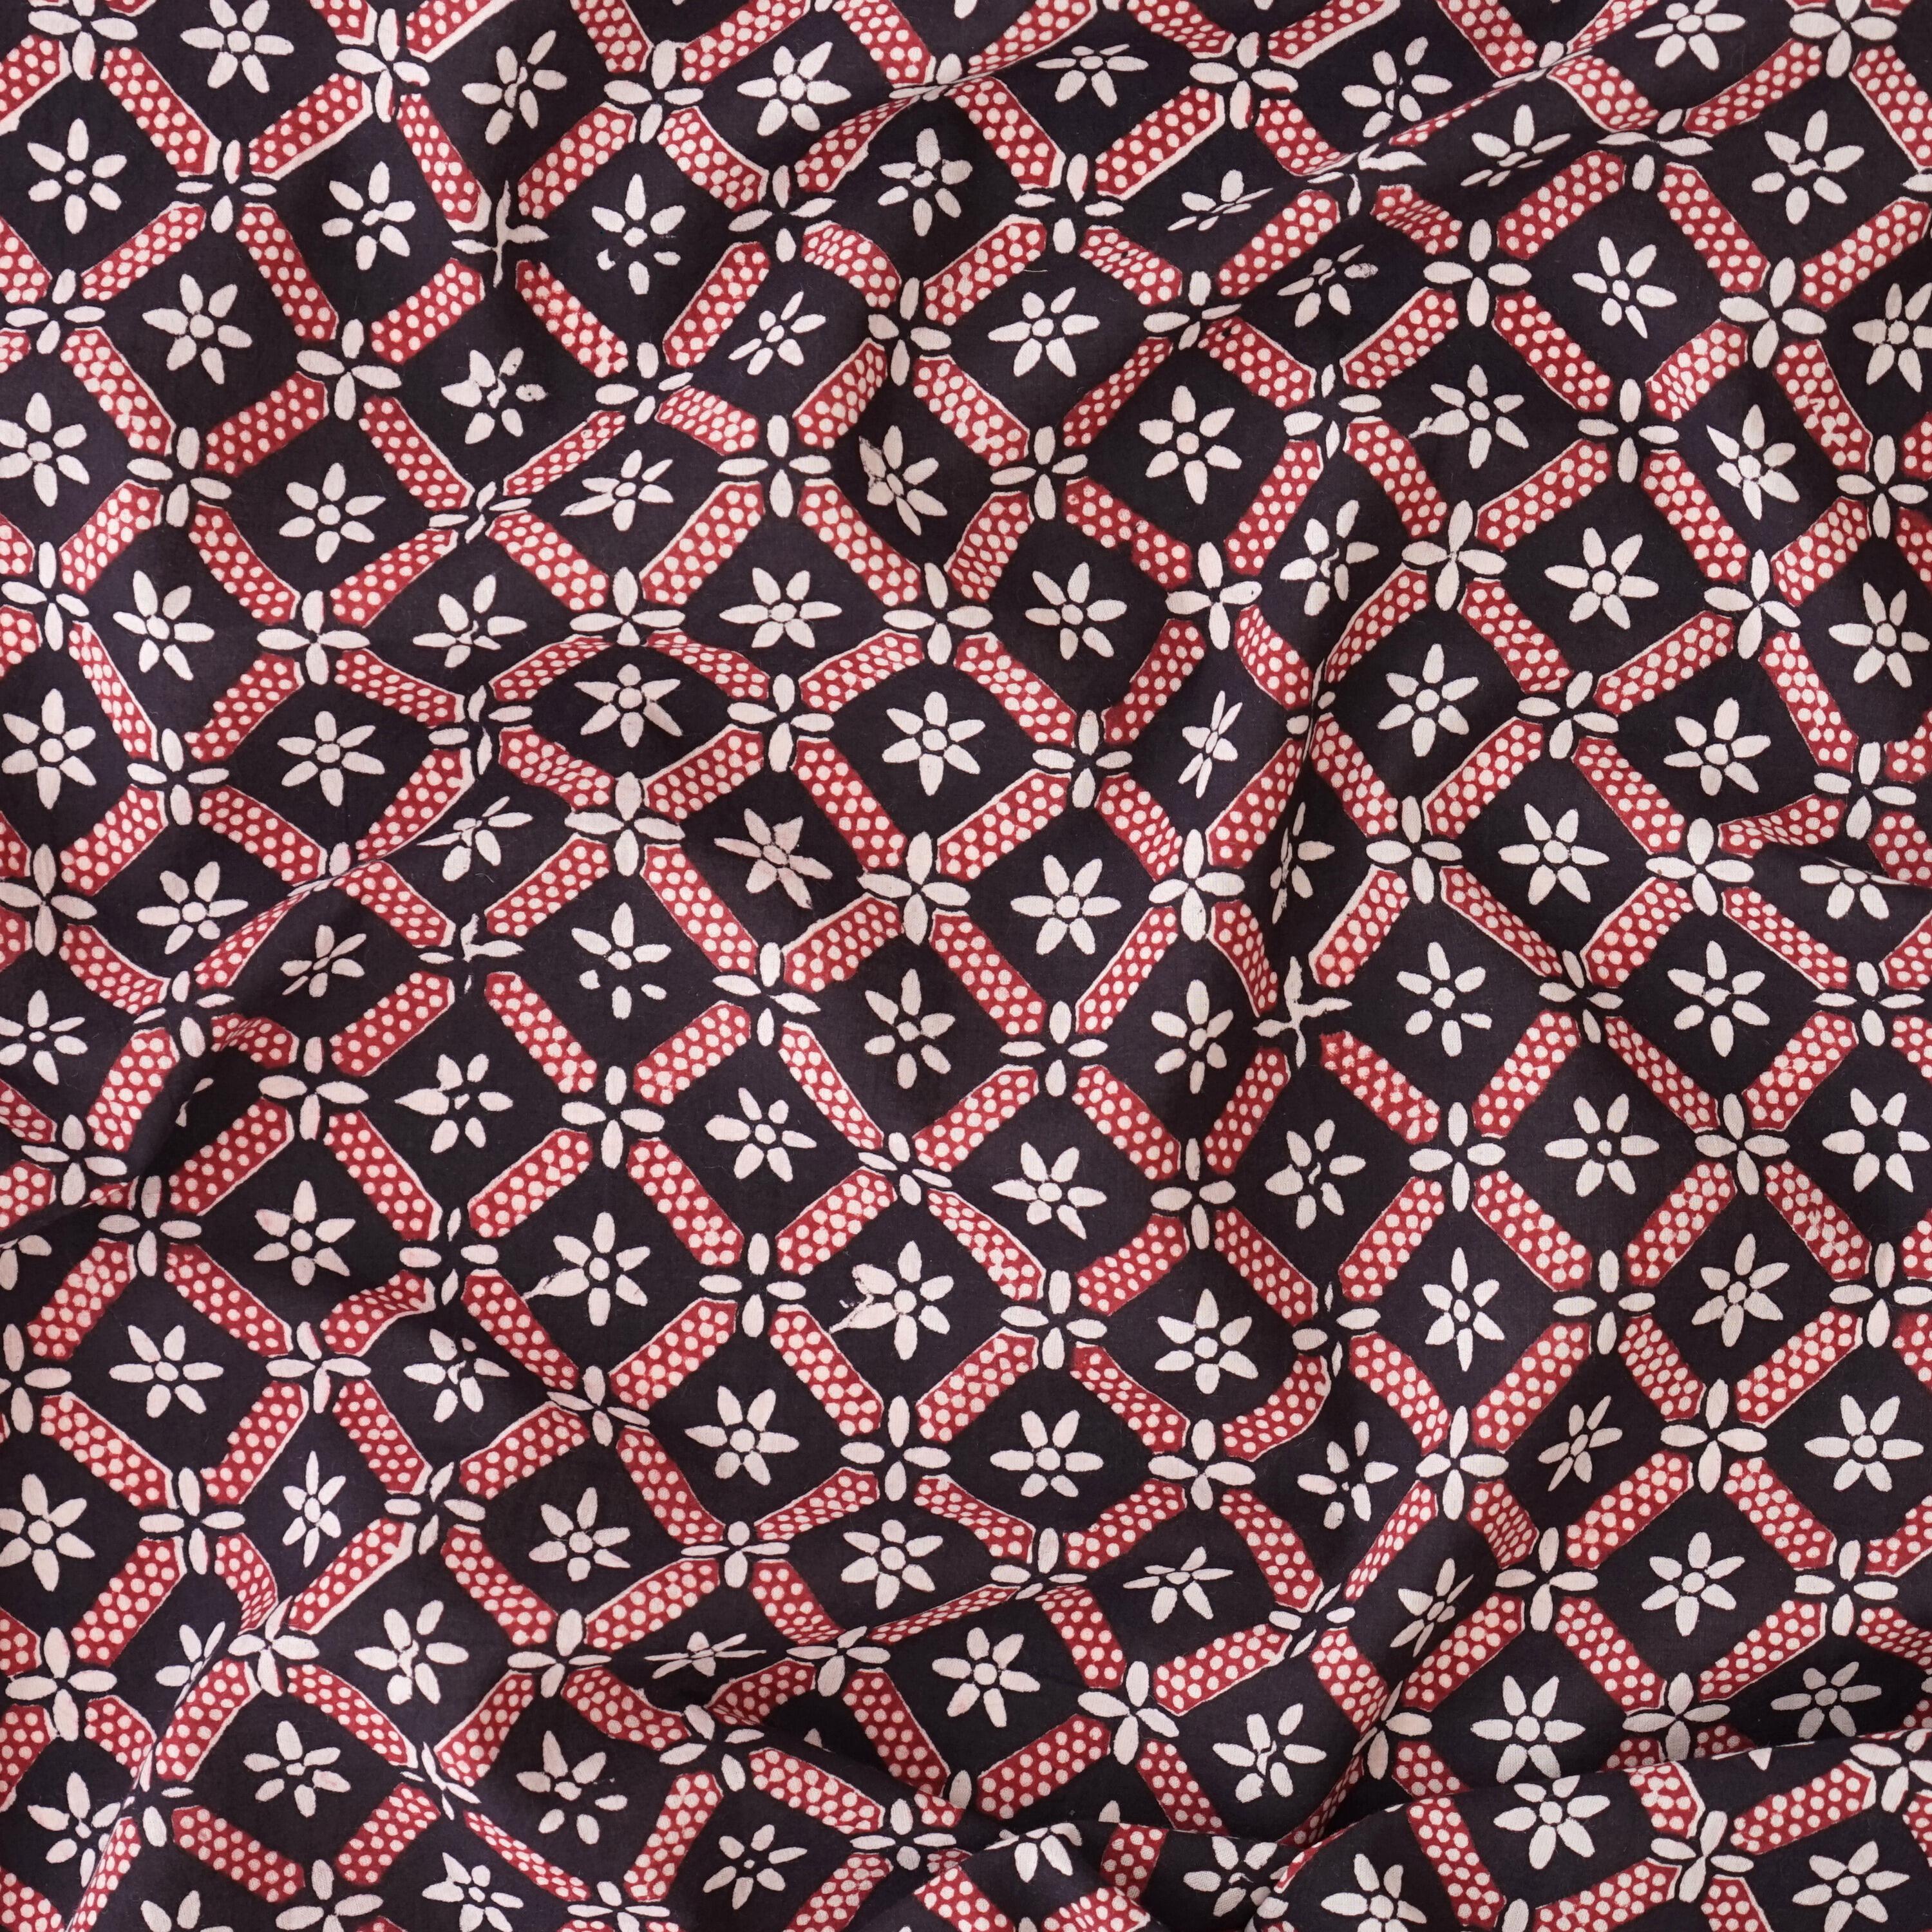 100% Block -Printed Cotton Fabric From India - Barley Design - Iron Rust Black & Alizarin Red Dyes - Contrast